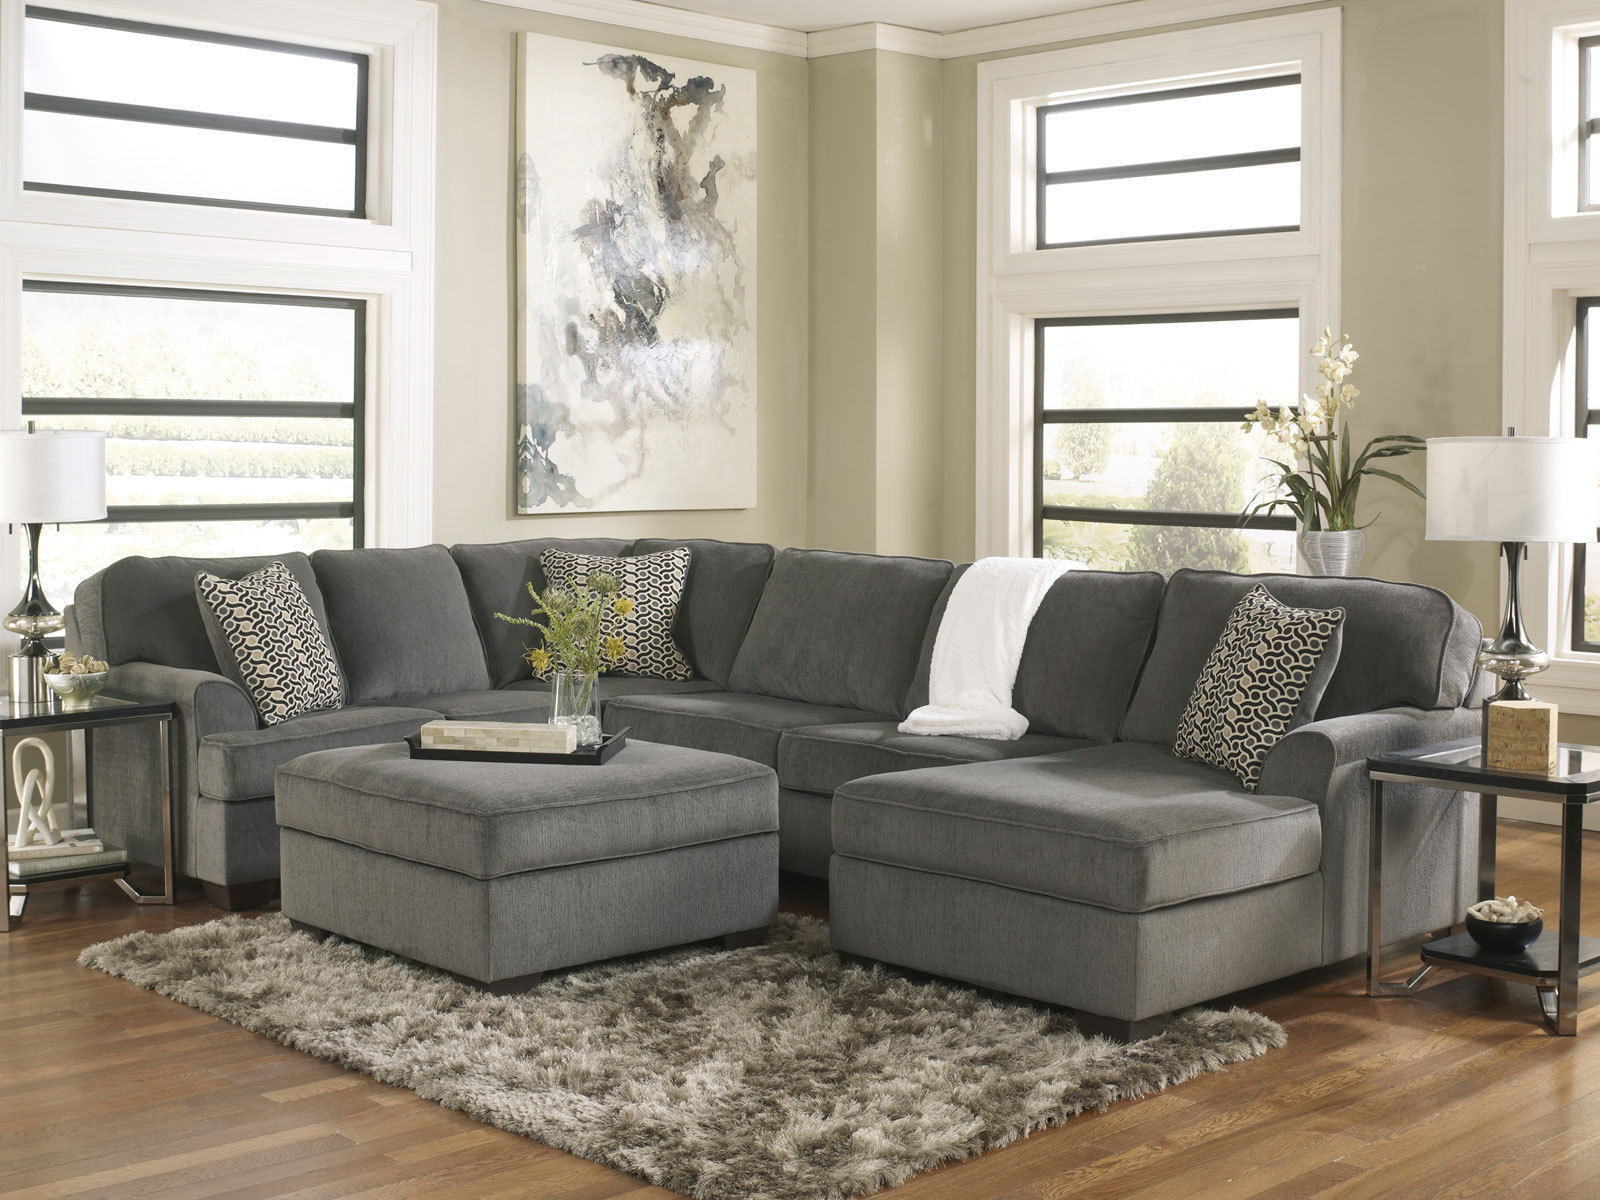 Living Room Ideas Gray Couch
 SOLE OVERSIZED MODERN GRAY FABRIC SOFA COUCH SECTIONAL SET